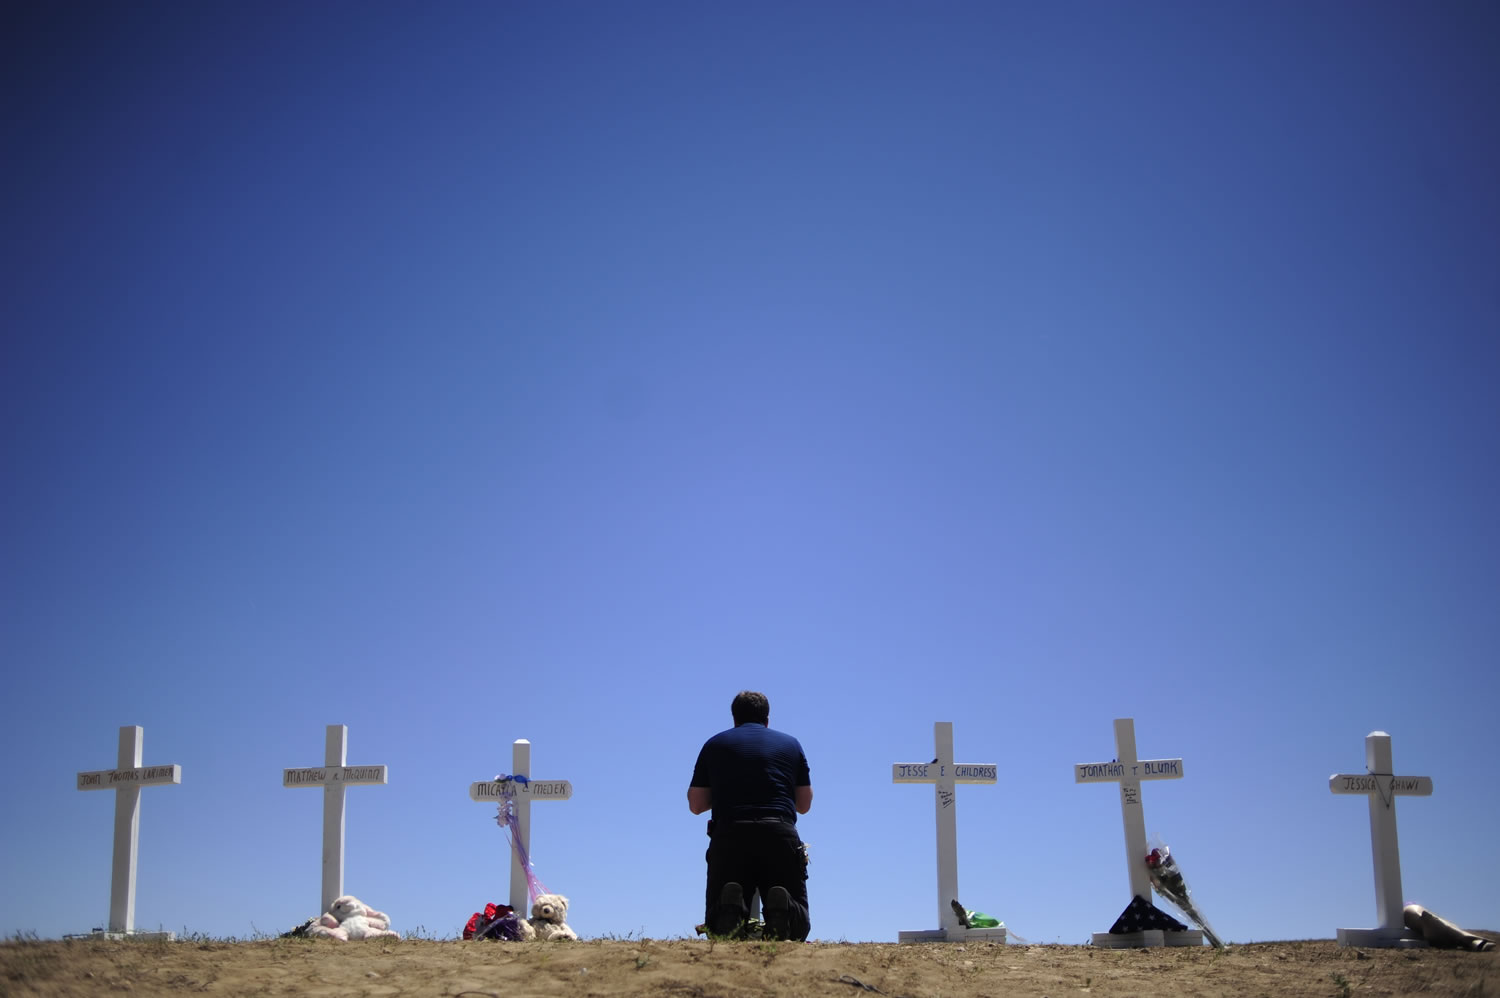 Travis Hirko kneels Sunday in front of the cross for Alex Sullivan at a memorial at in Aurora, Colo. Hirko went to high school with Sullivan, a victim of Friday's shooting rampage.